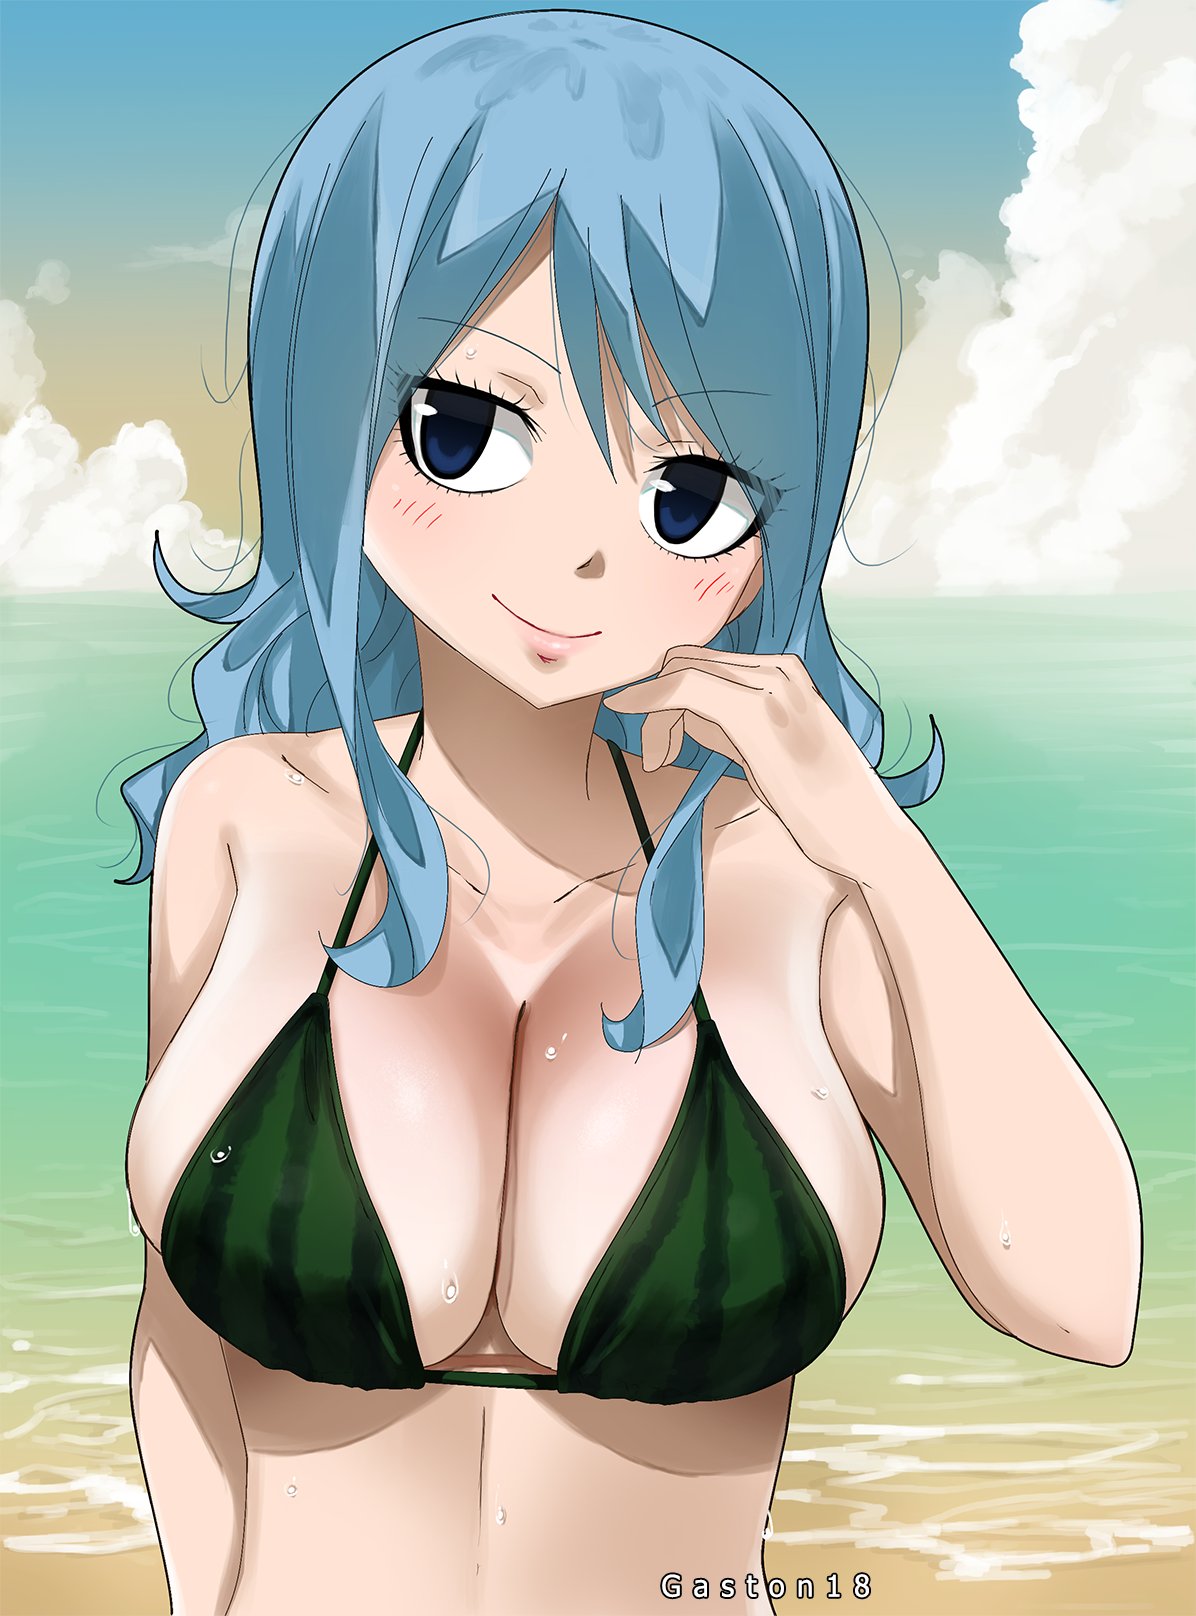 "Juvia is surprised no black men or women have taken her up on her off...